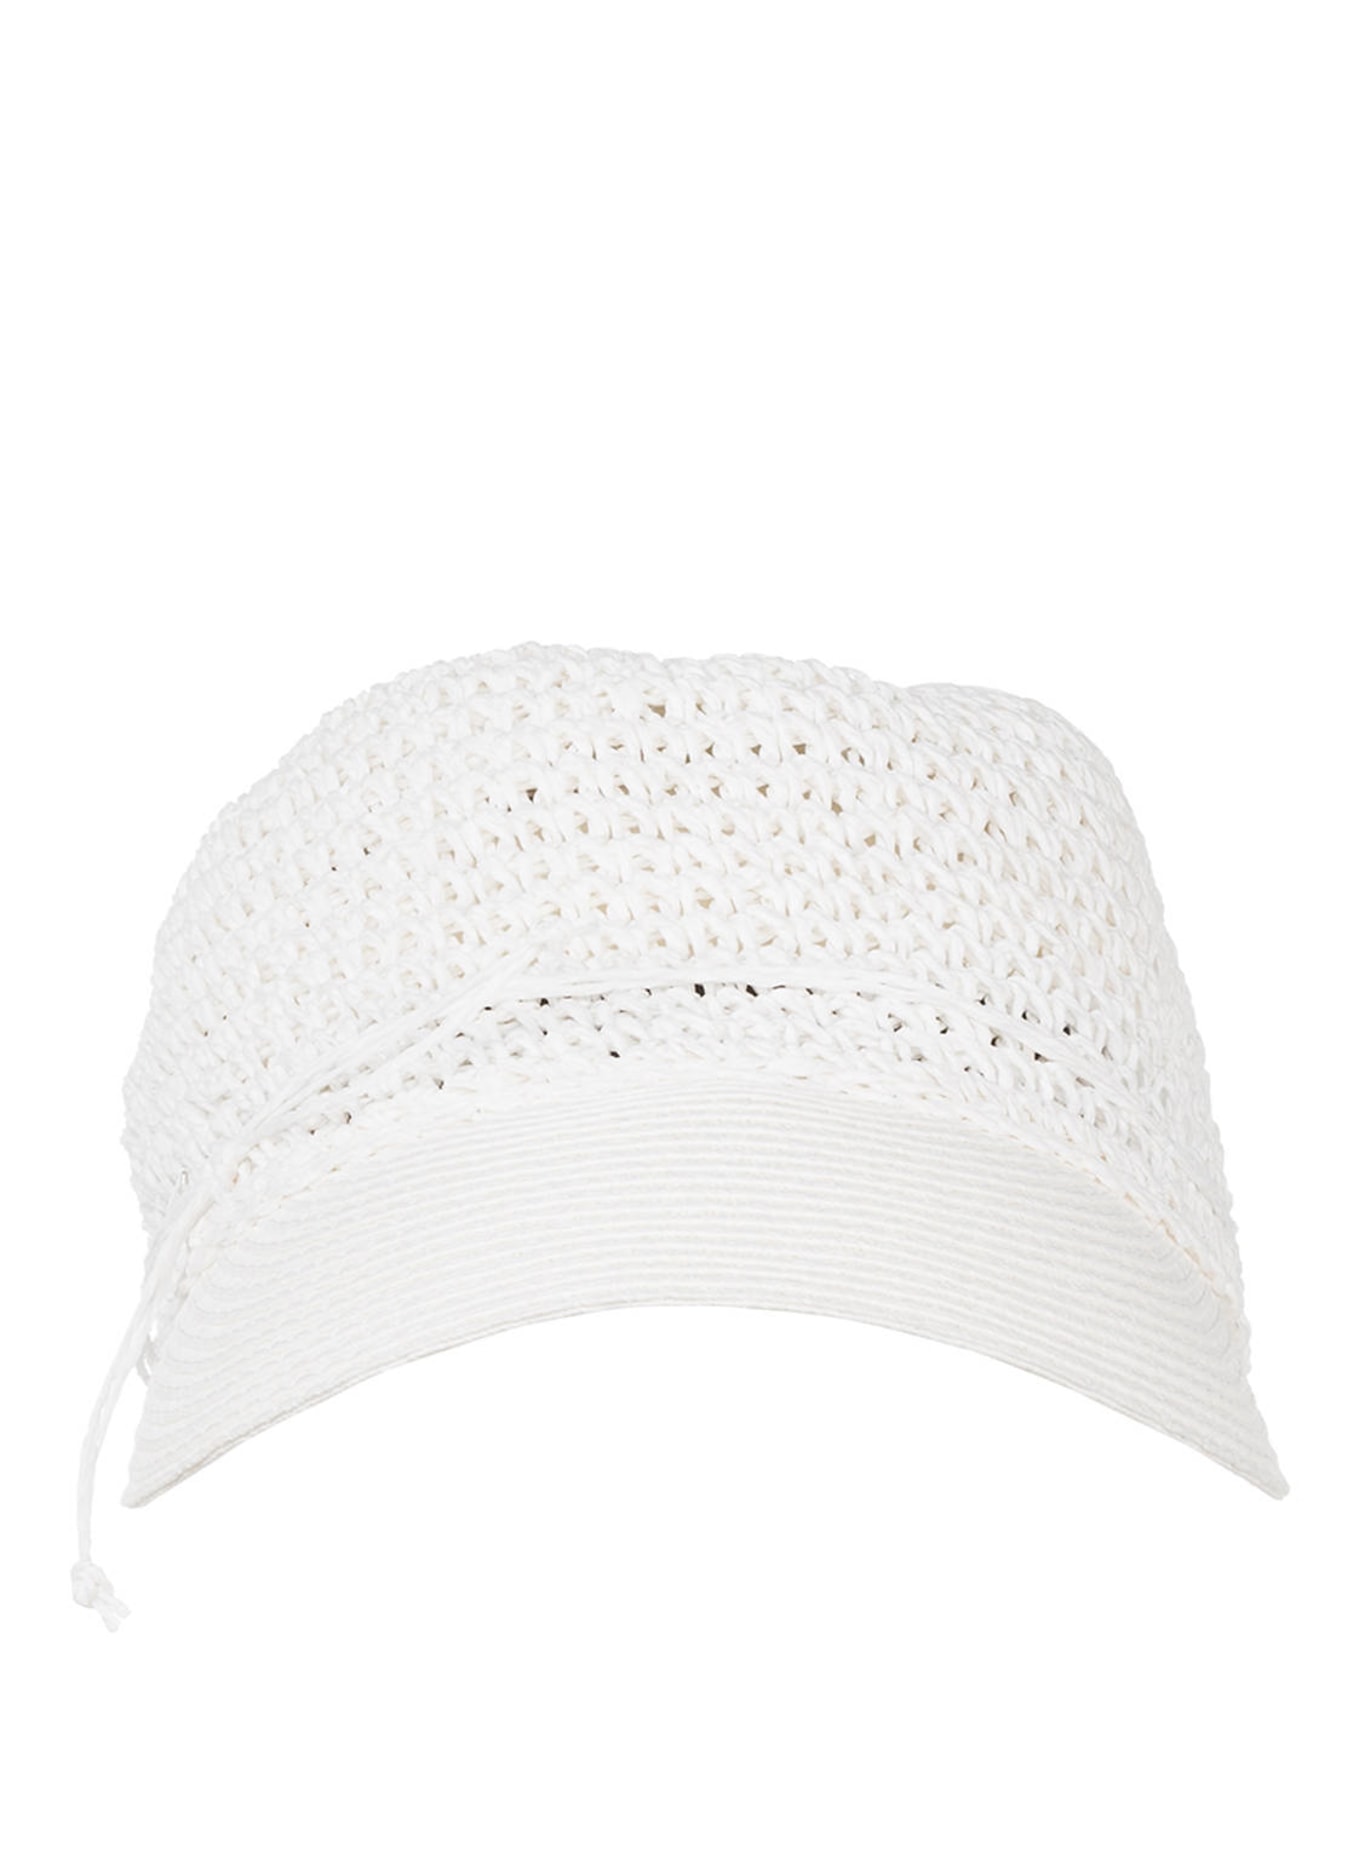 SEEBERGER Straw cap, Color: WHITE (Image 2)